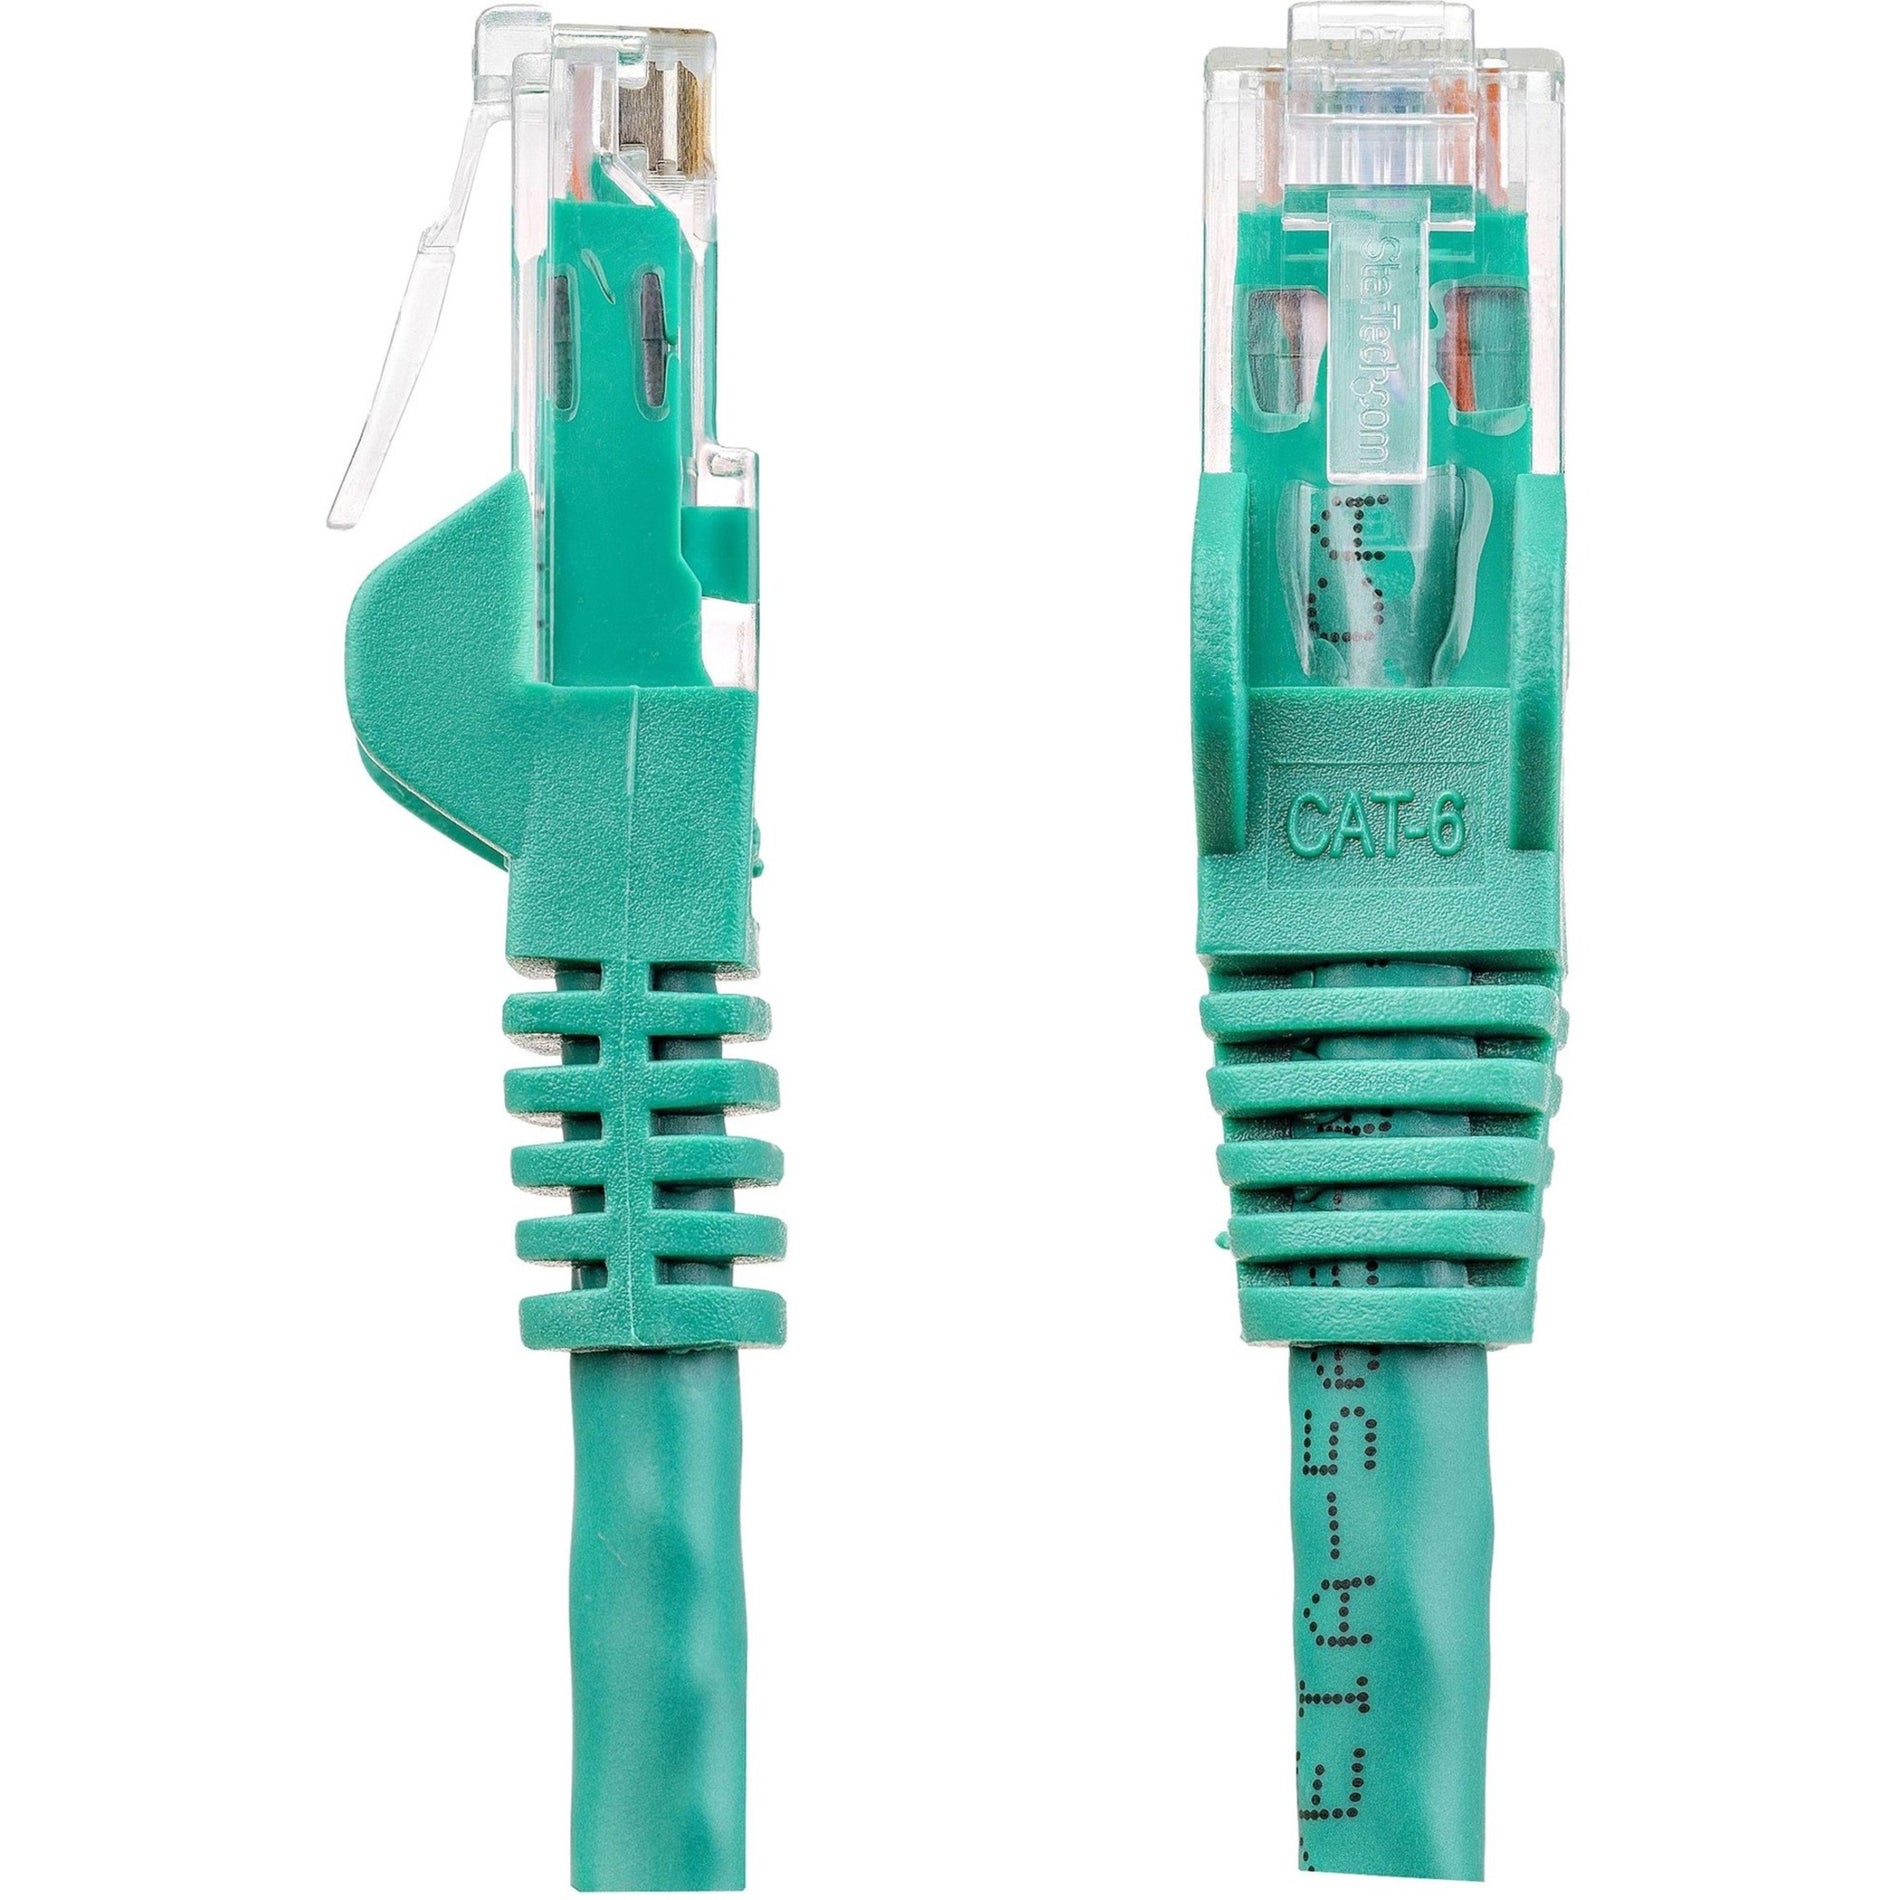 StarTech.com N6PATCH100GN 100 ft Green Snagless Cat6 UTP Patch Cable, Lifetime Warranty, 10 Gbit/s Data Transfer Rate, Rust Resistant